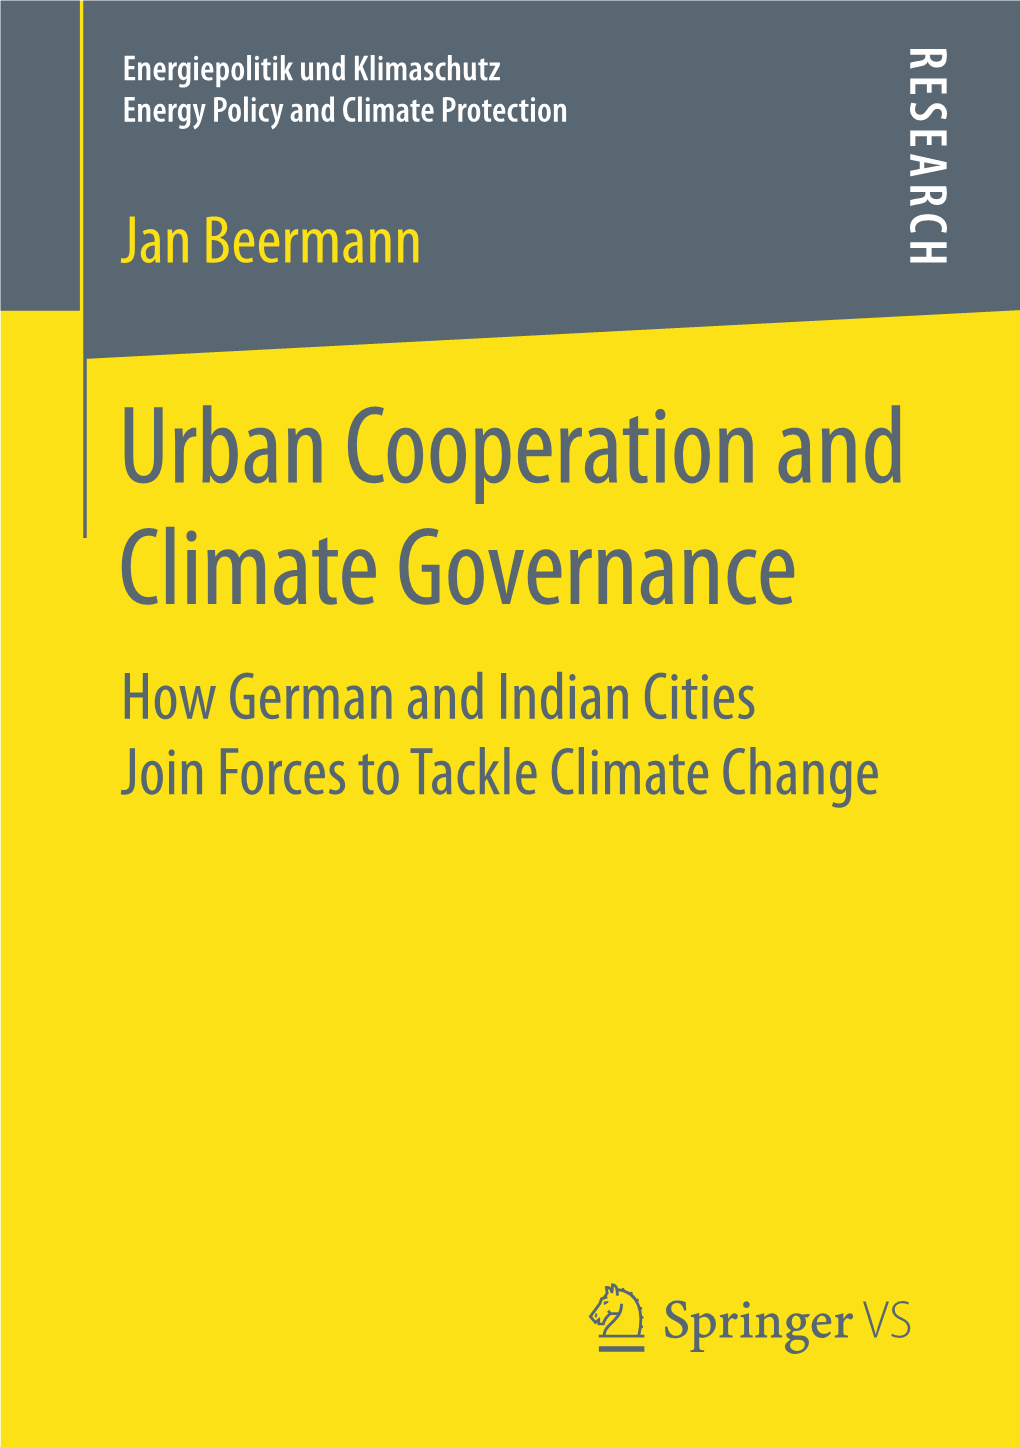 Urban Cooperation and Climate Governance